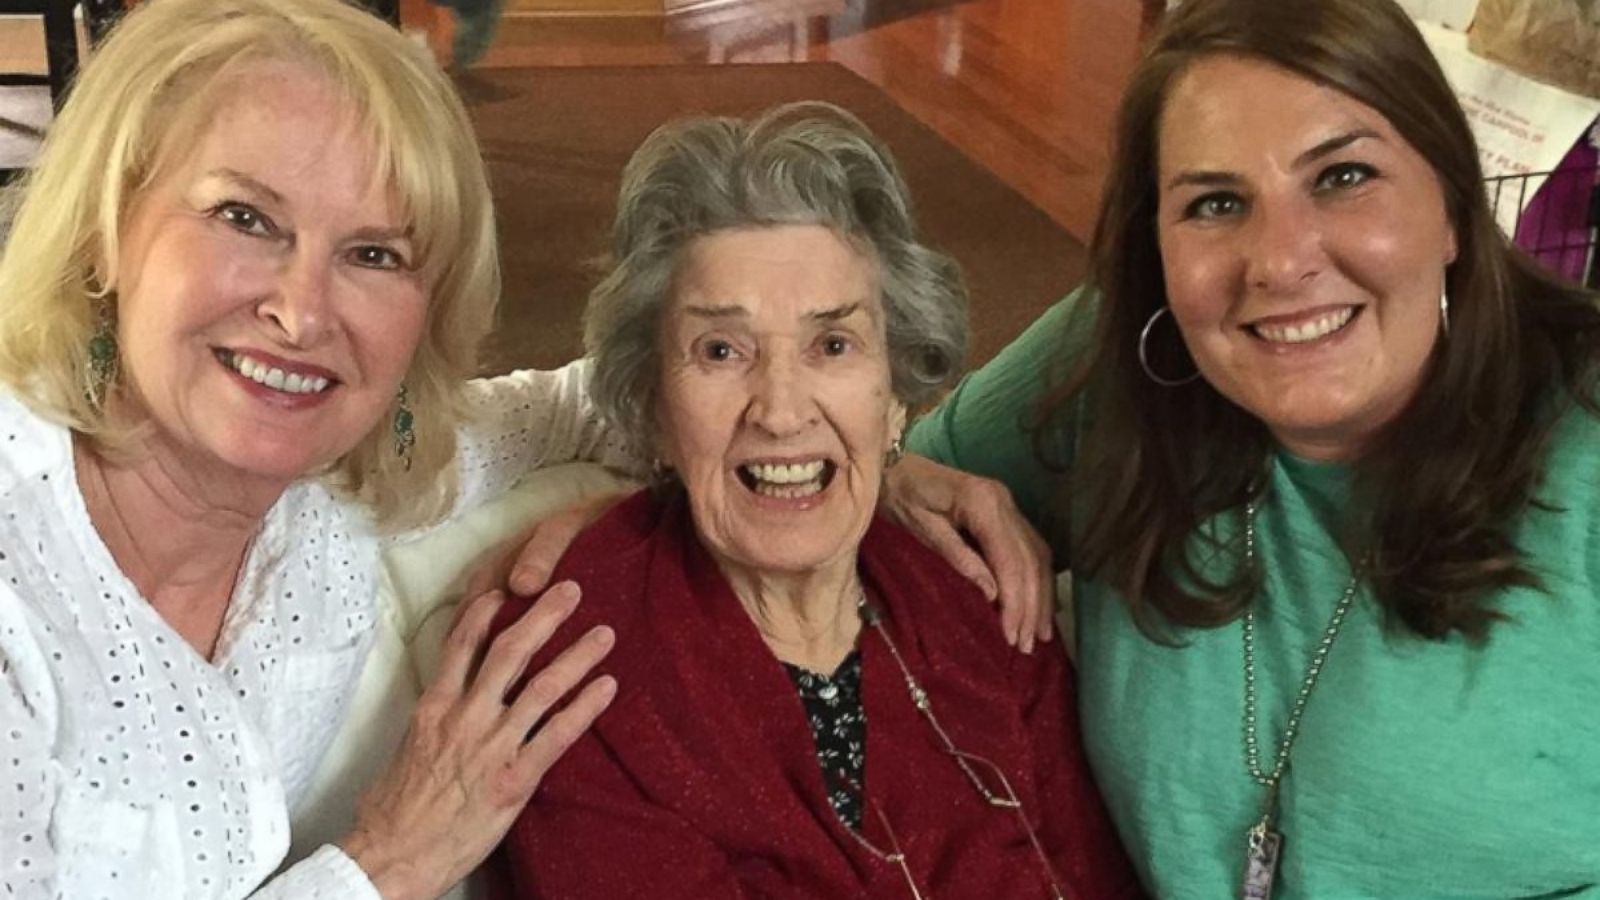 Sassy Grandma's Funeral Rules Has the Internet in Tears